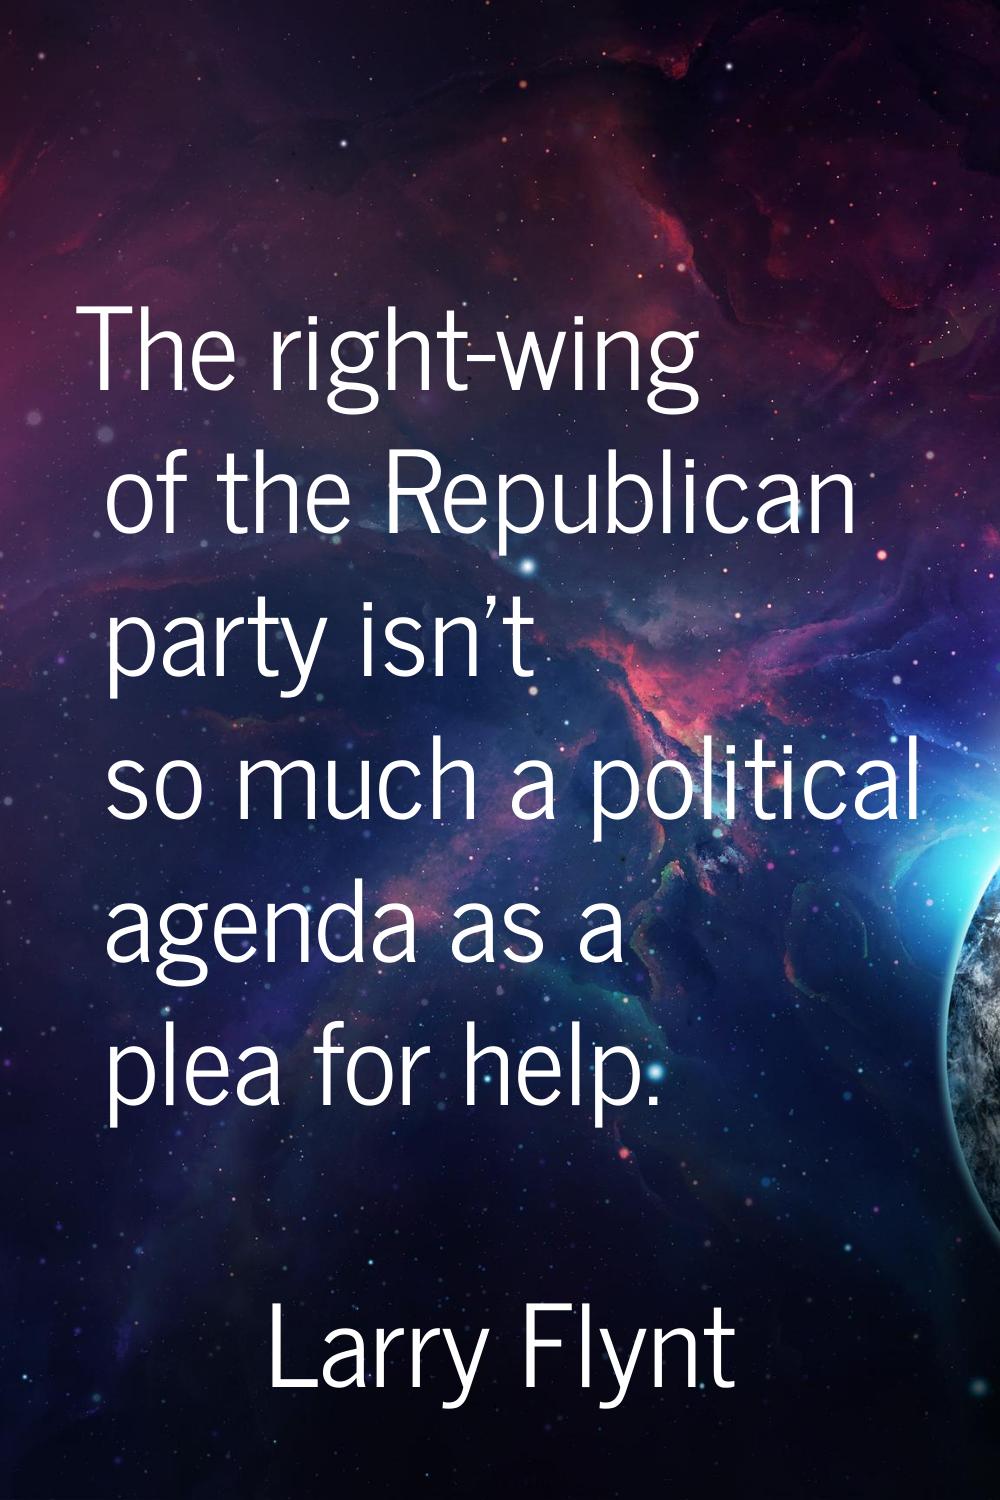 The right-wing of the Republican party isn't so much a political agenda as a plea for help.